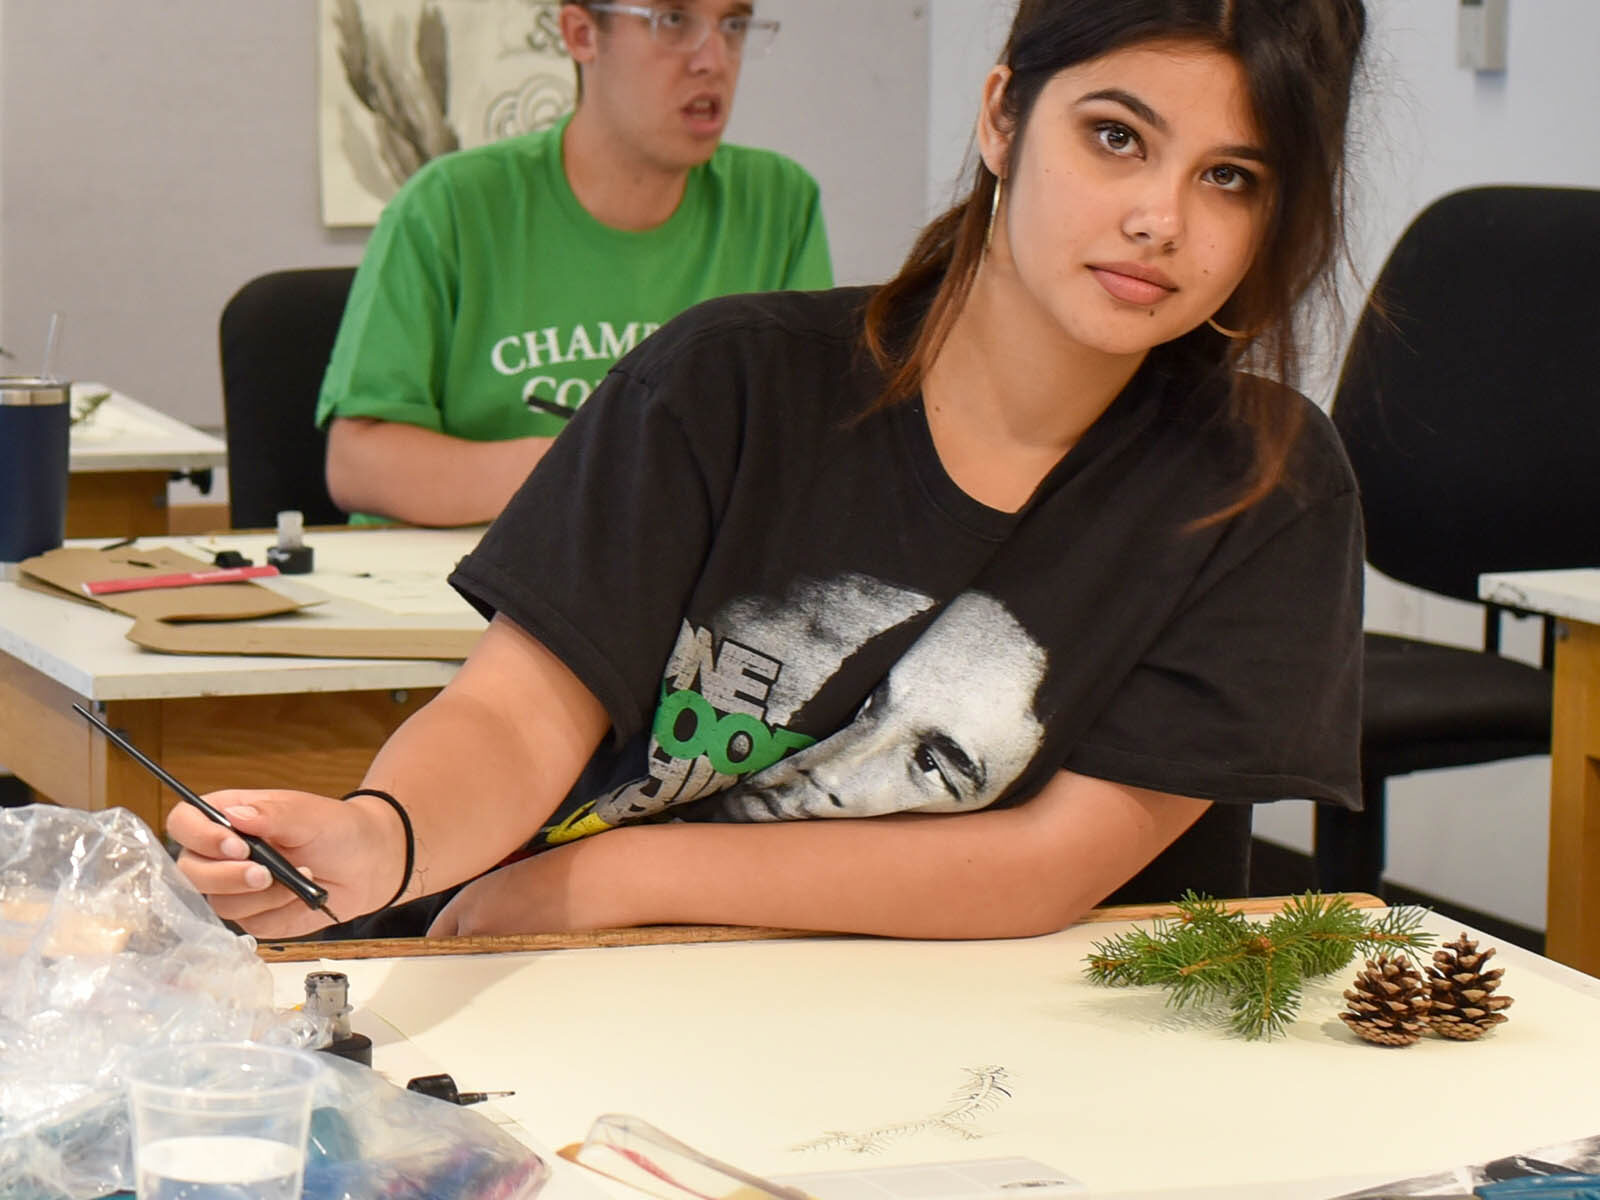 creative media student working on a painting using some foliage as a model